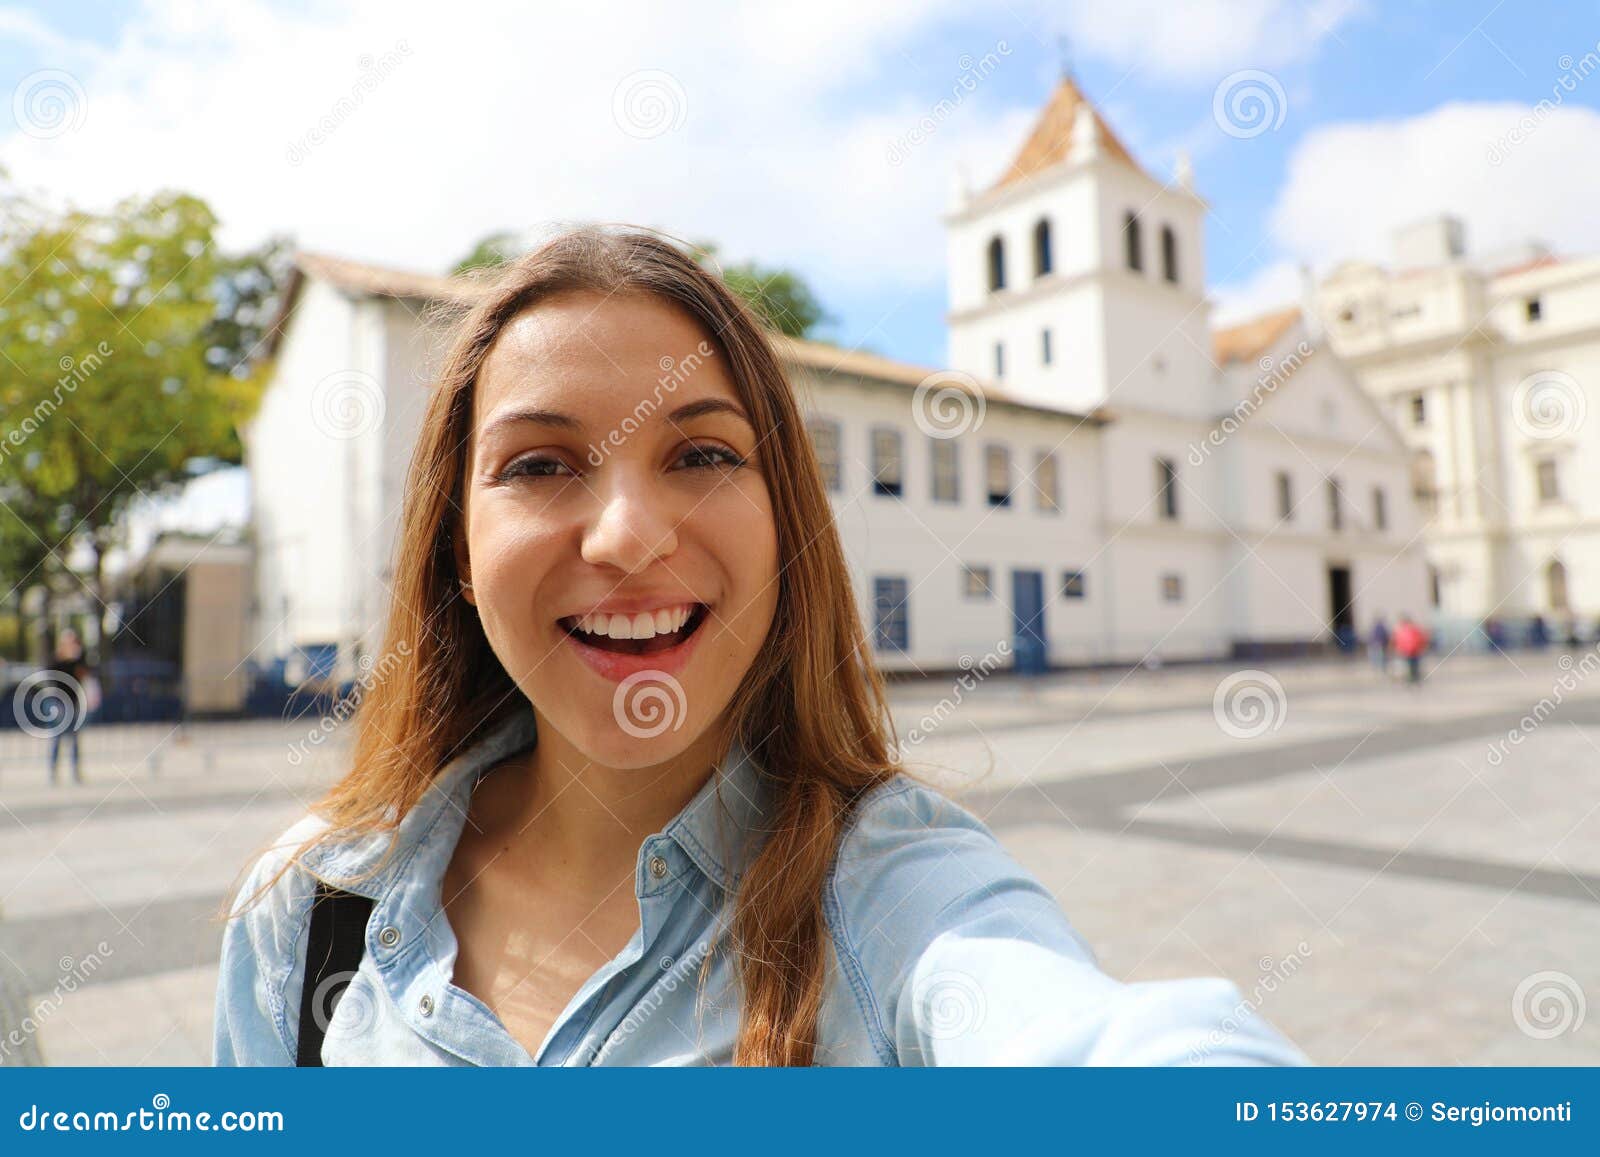 happy smiling young woman in sao paulo city center take self portrait with patio do colegio landmark on the background, sao paulo